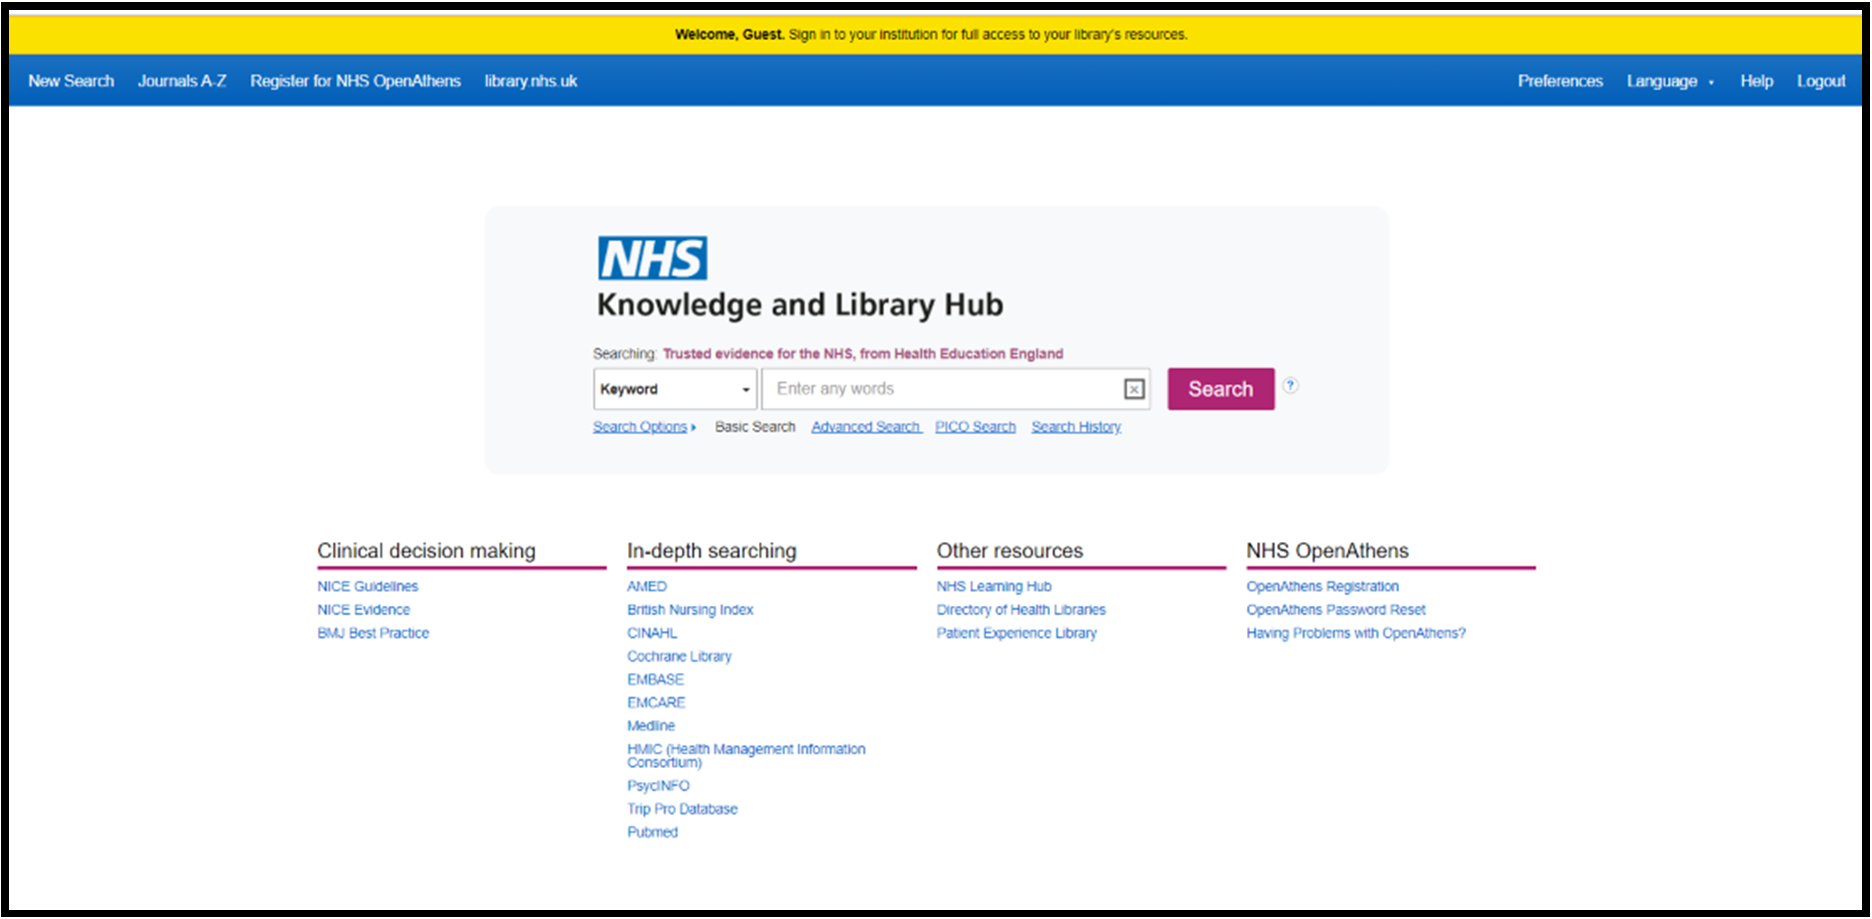 Screenshot of the NHS Knowledge and Library Hub